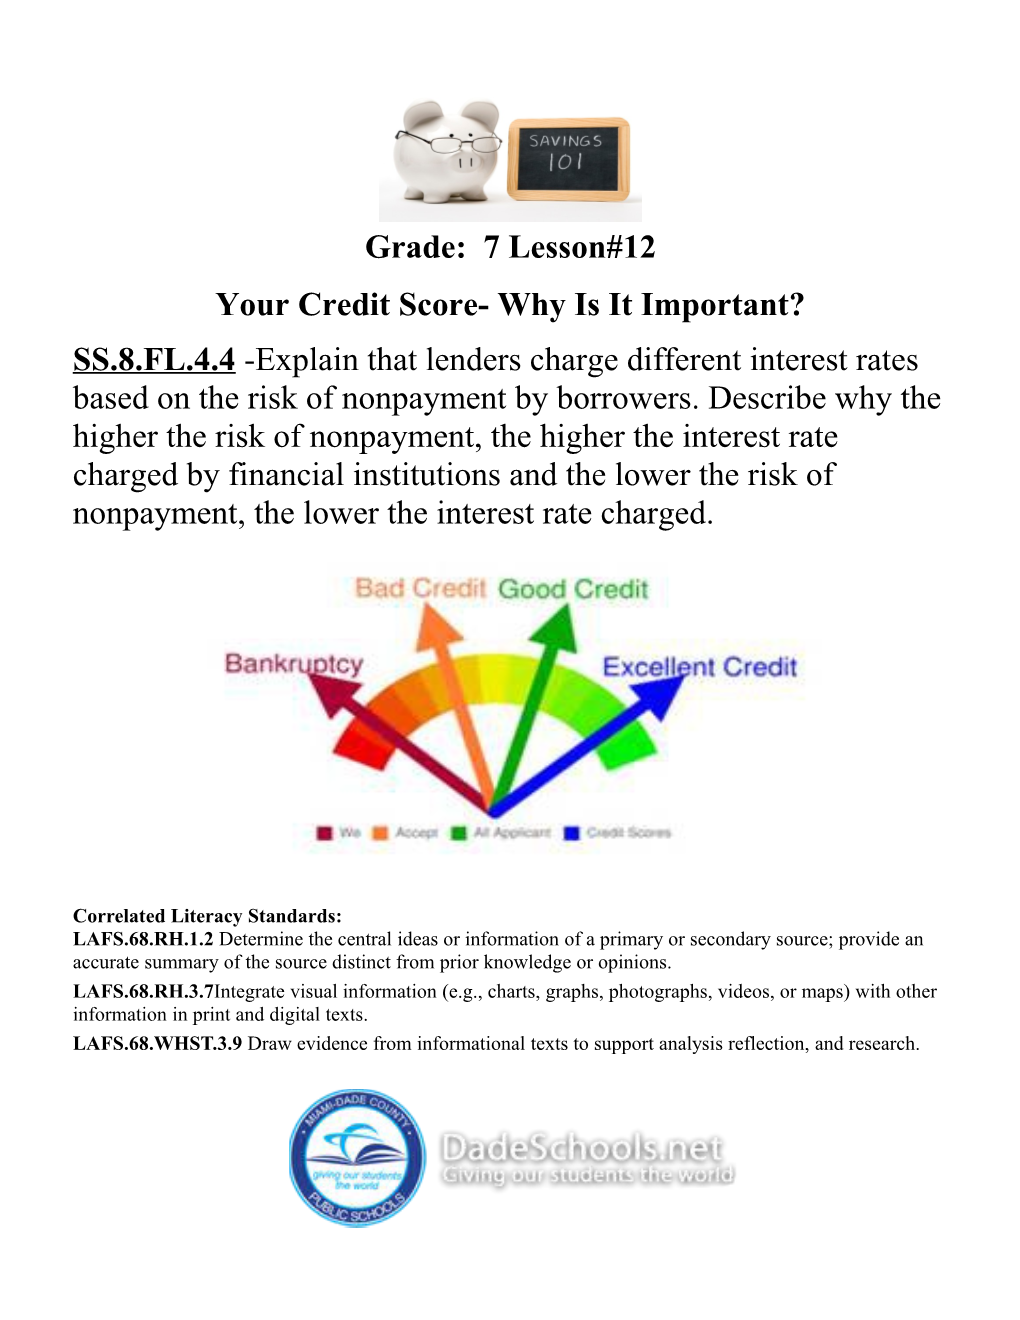 Your Credit Score- Why Is It Important?